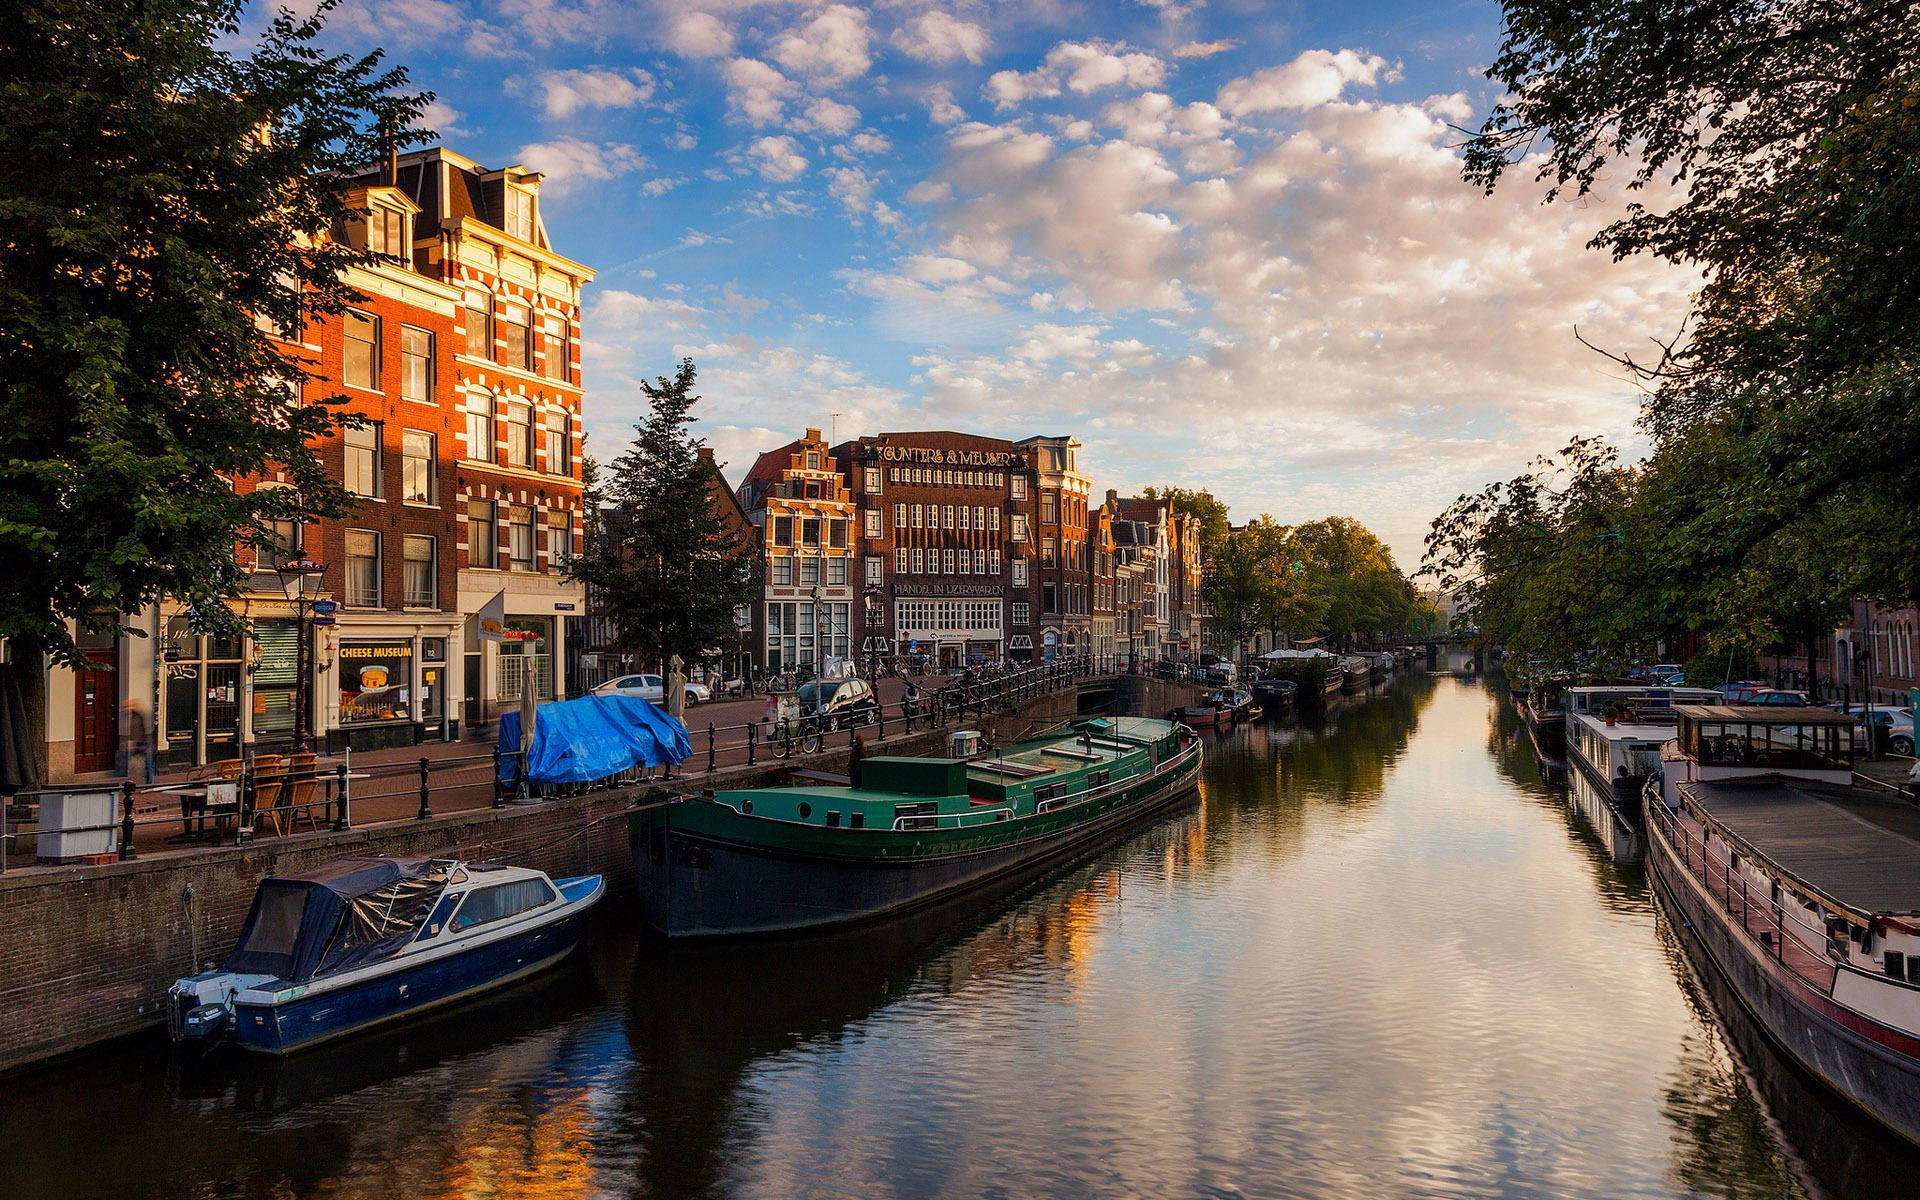 Europe's Long Narrow River Amsterdam Background